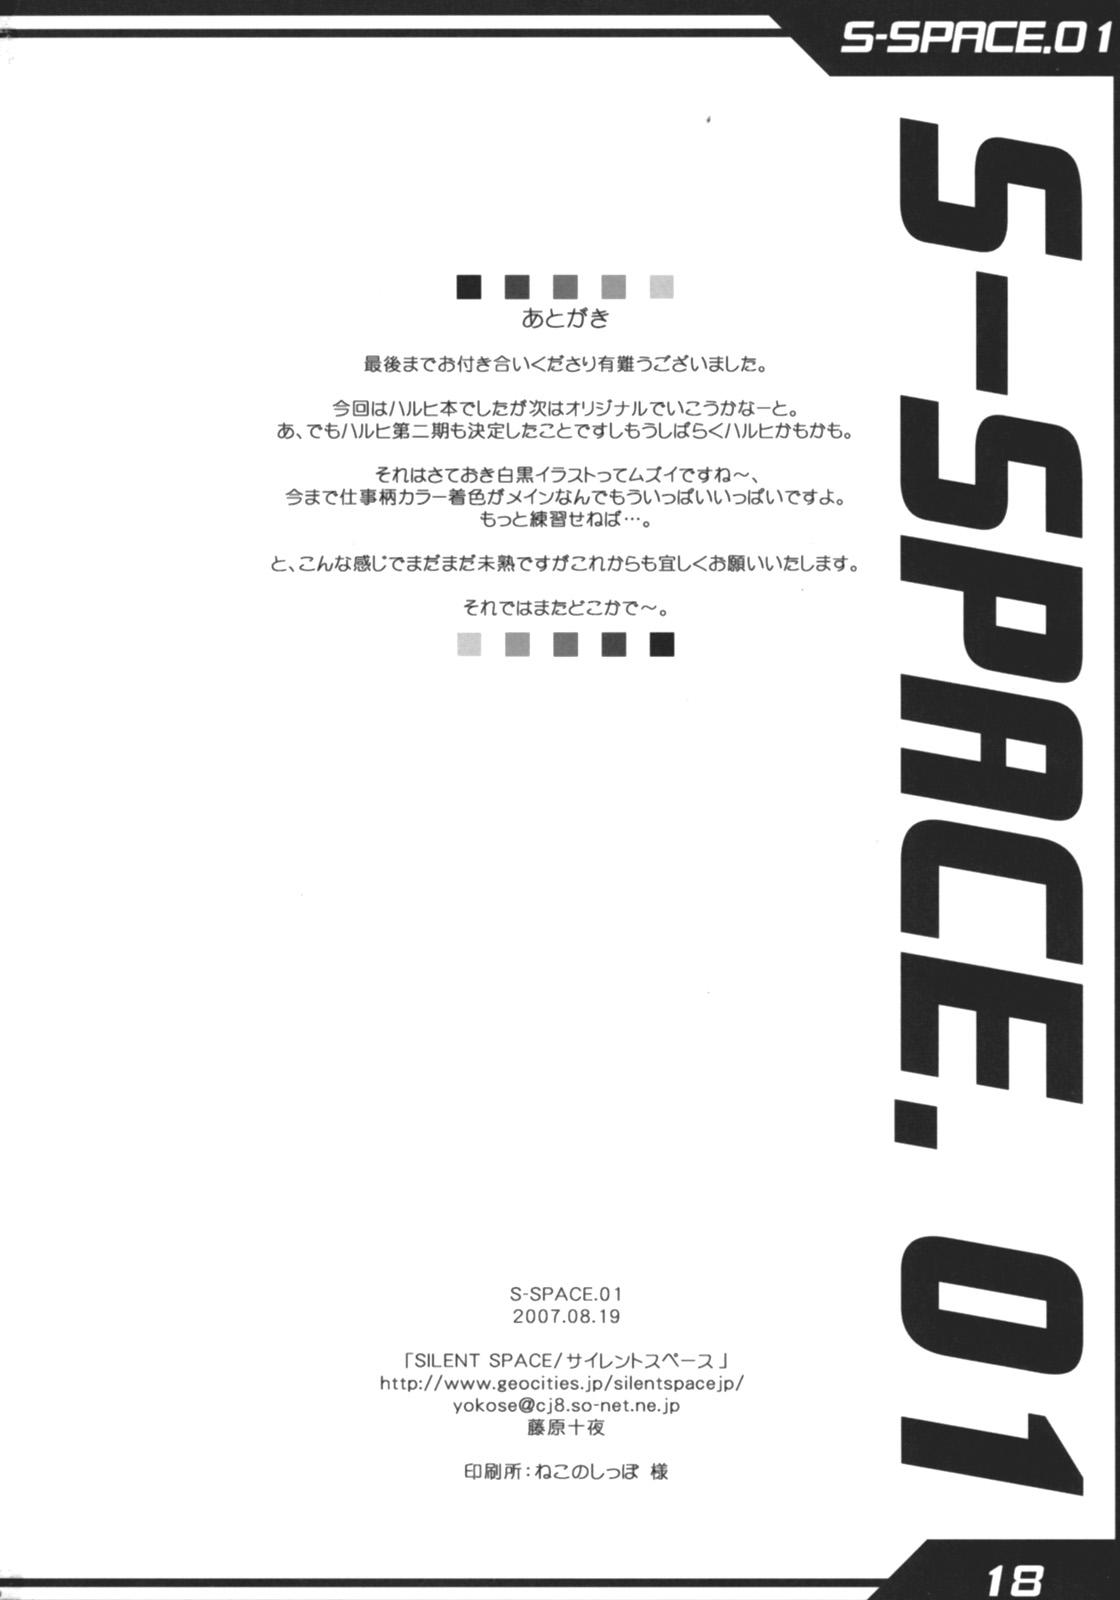 S-SPACE. 01 17